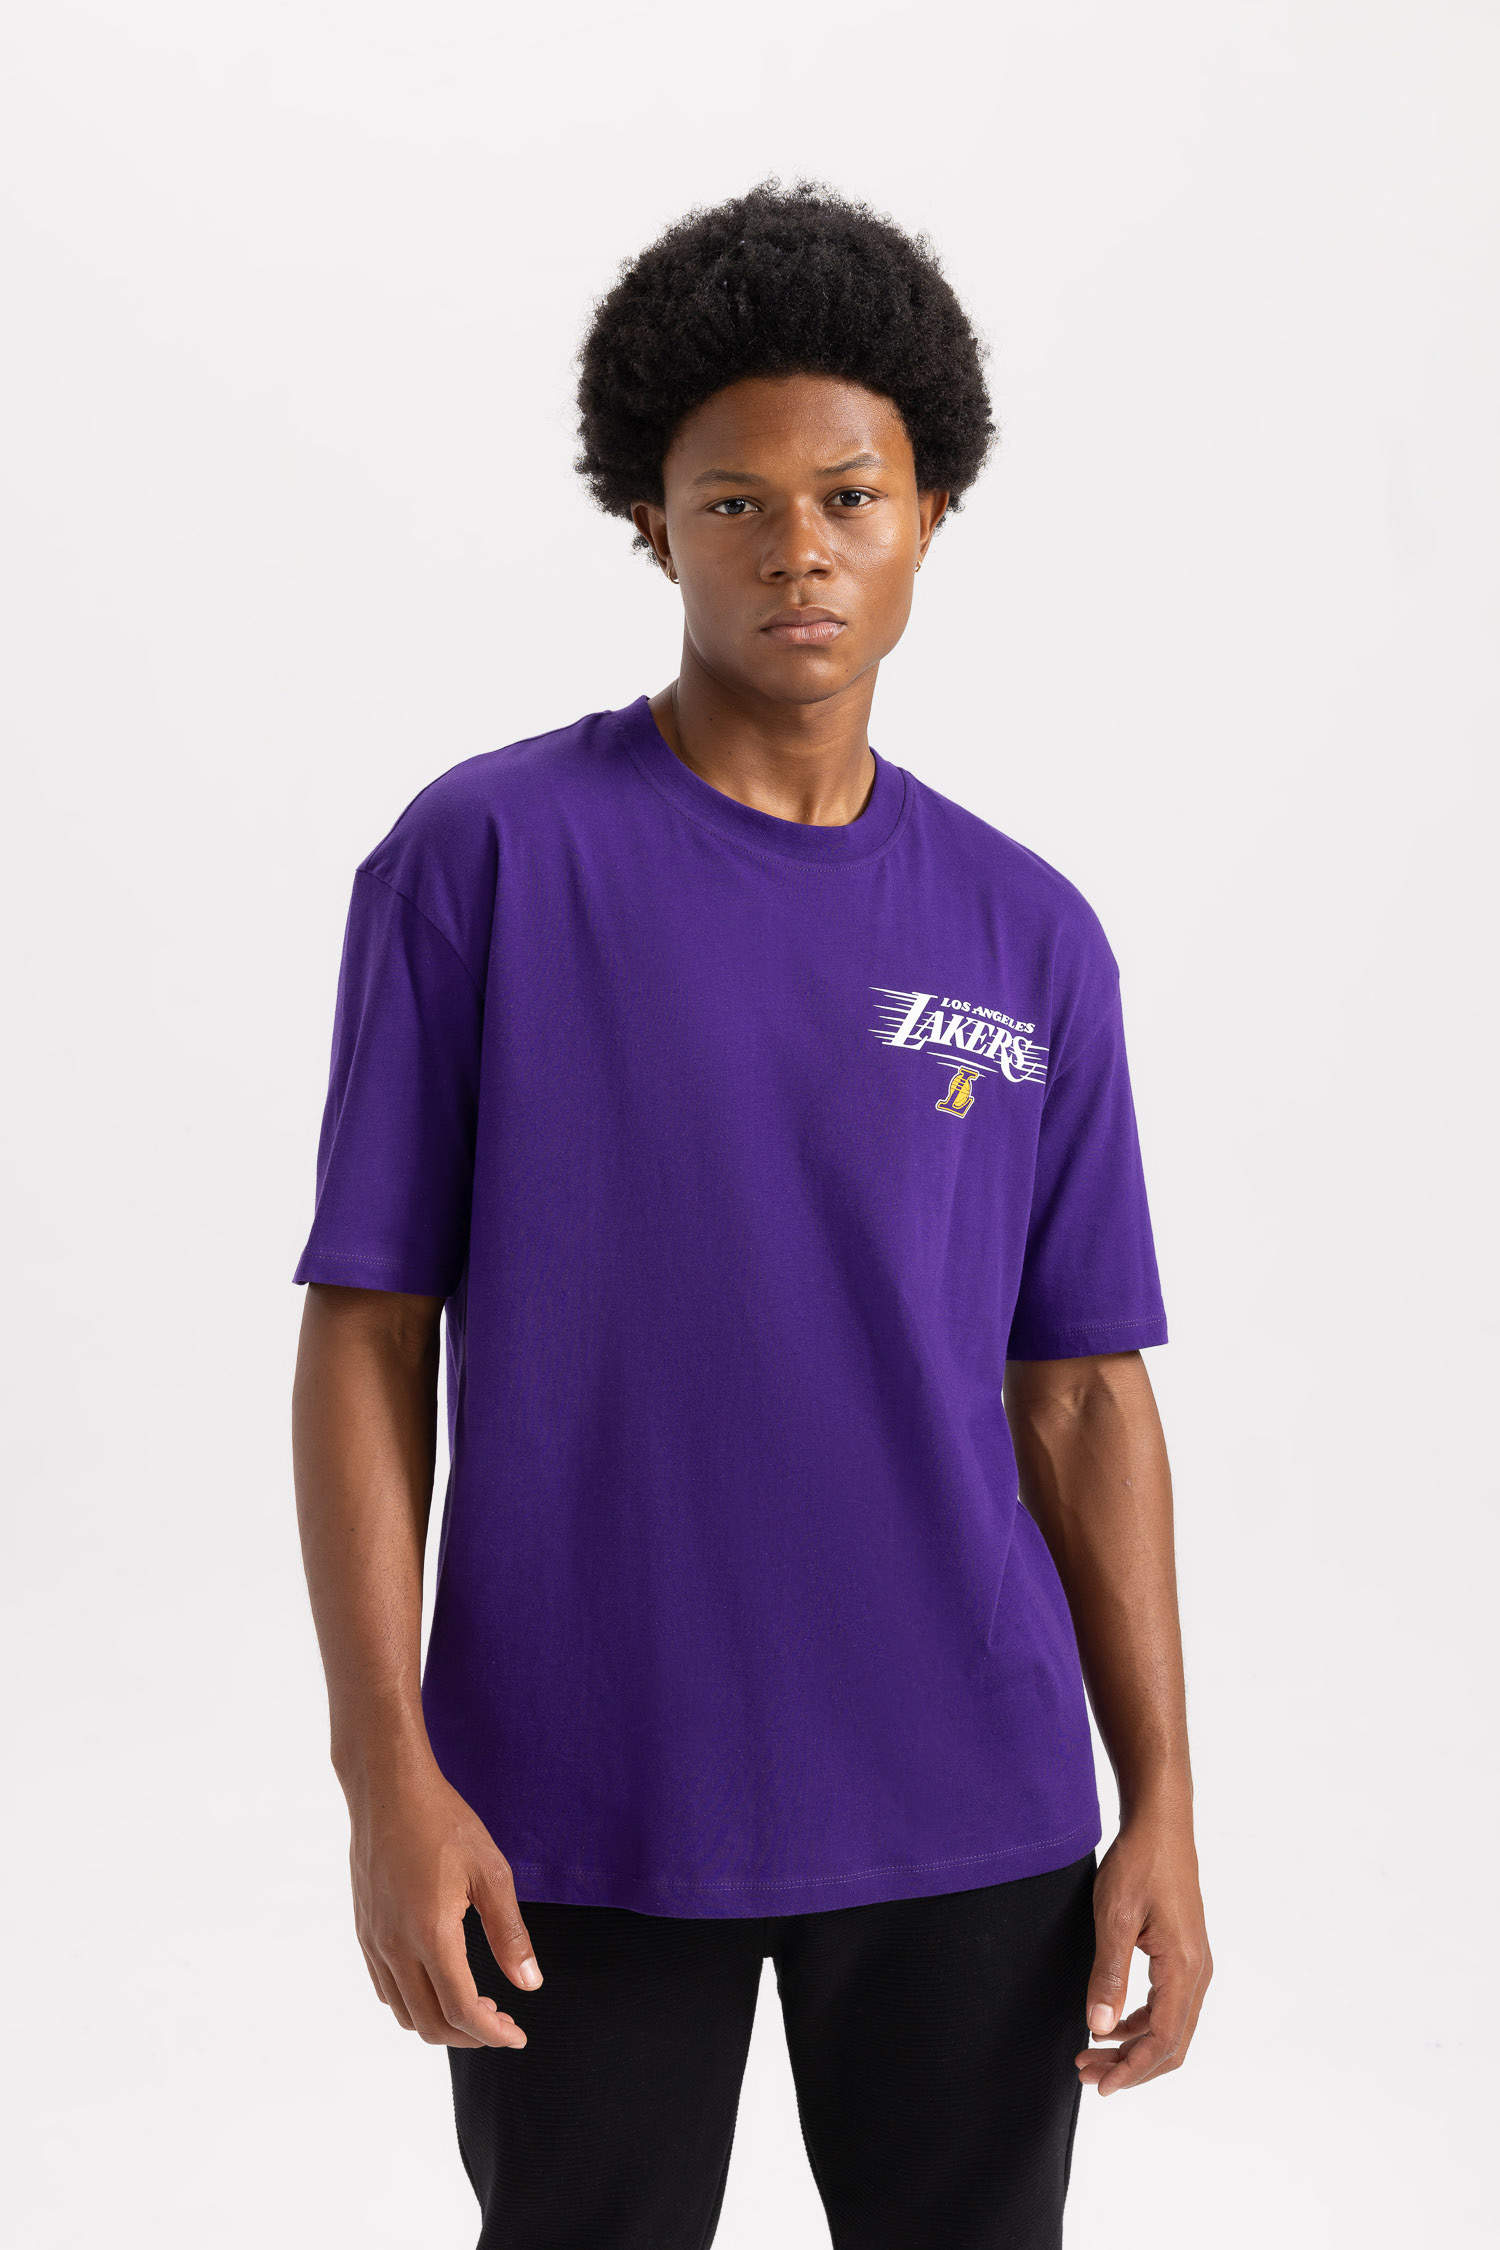 NBA Los Angeles Lakers Licensed Oversize Fit Back Printed Short Sleeve  T-Shirt